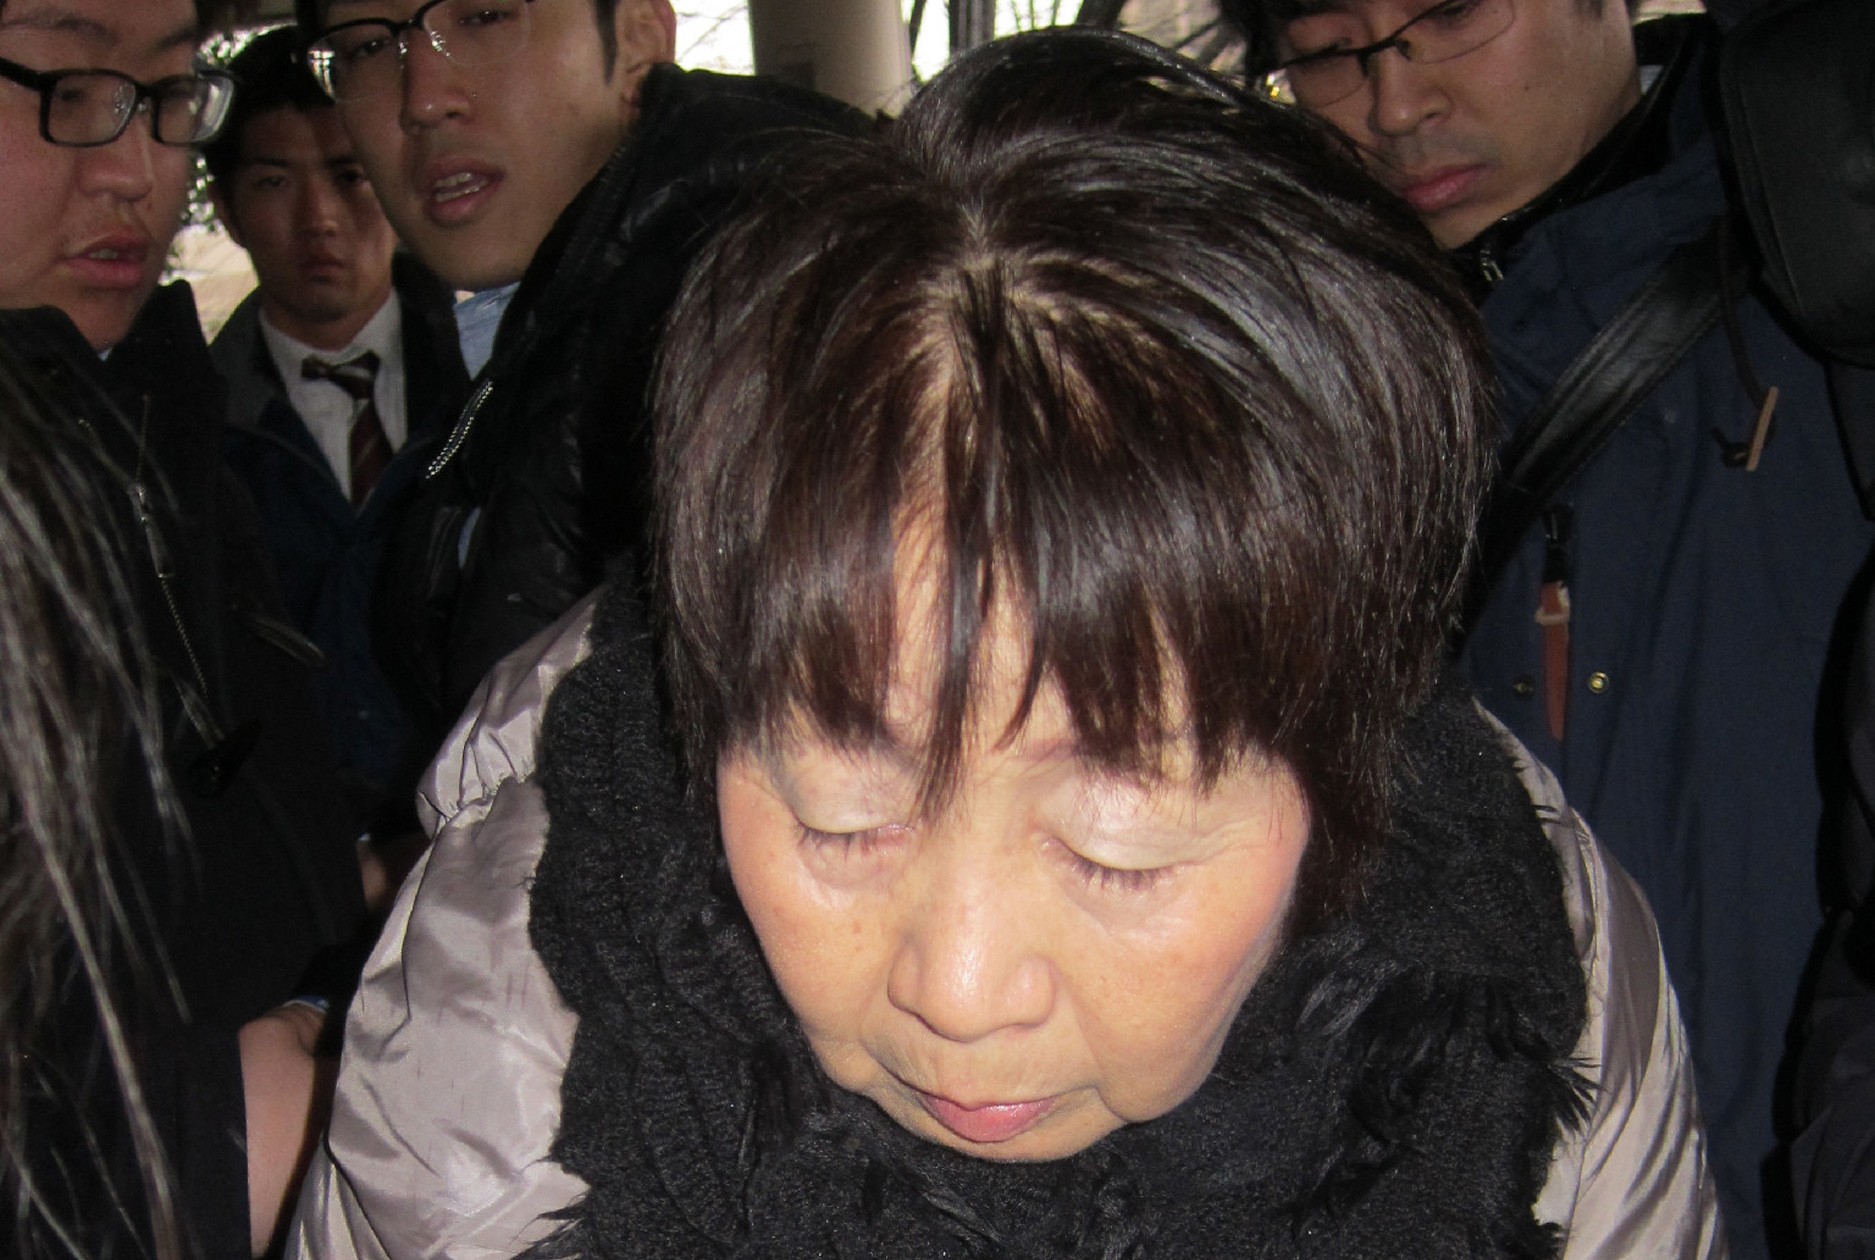 Chisako Kakehi, dubbed the “Black Widow”, used cyanide to kill a string of elderly and rich lovers and pocketed millions in insurance payouts and inheritance. Photo: AFP